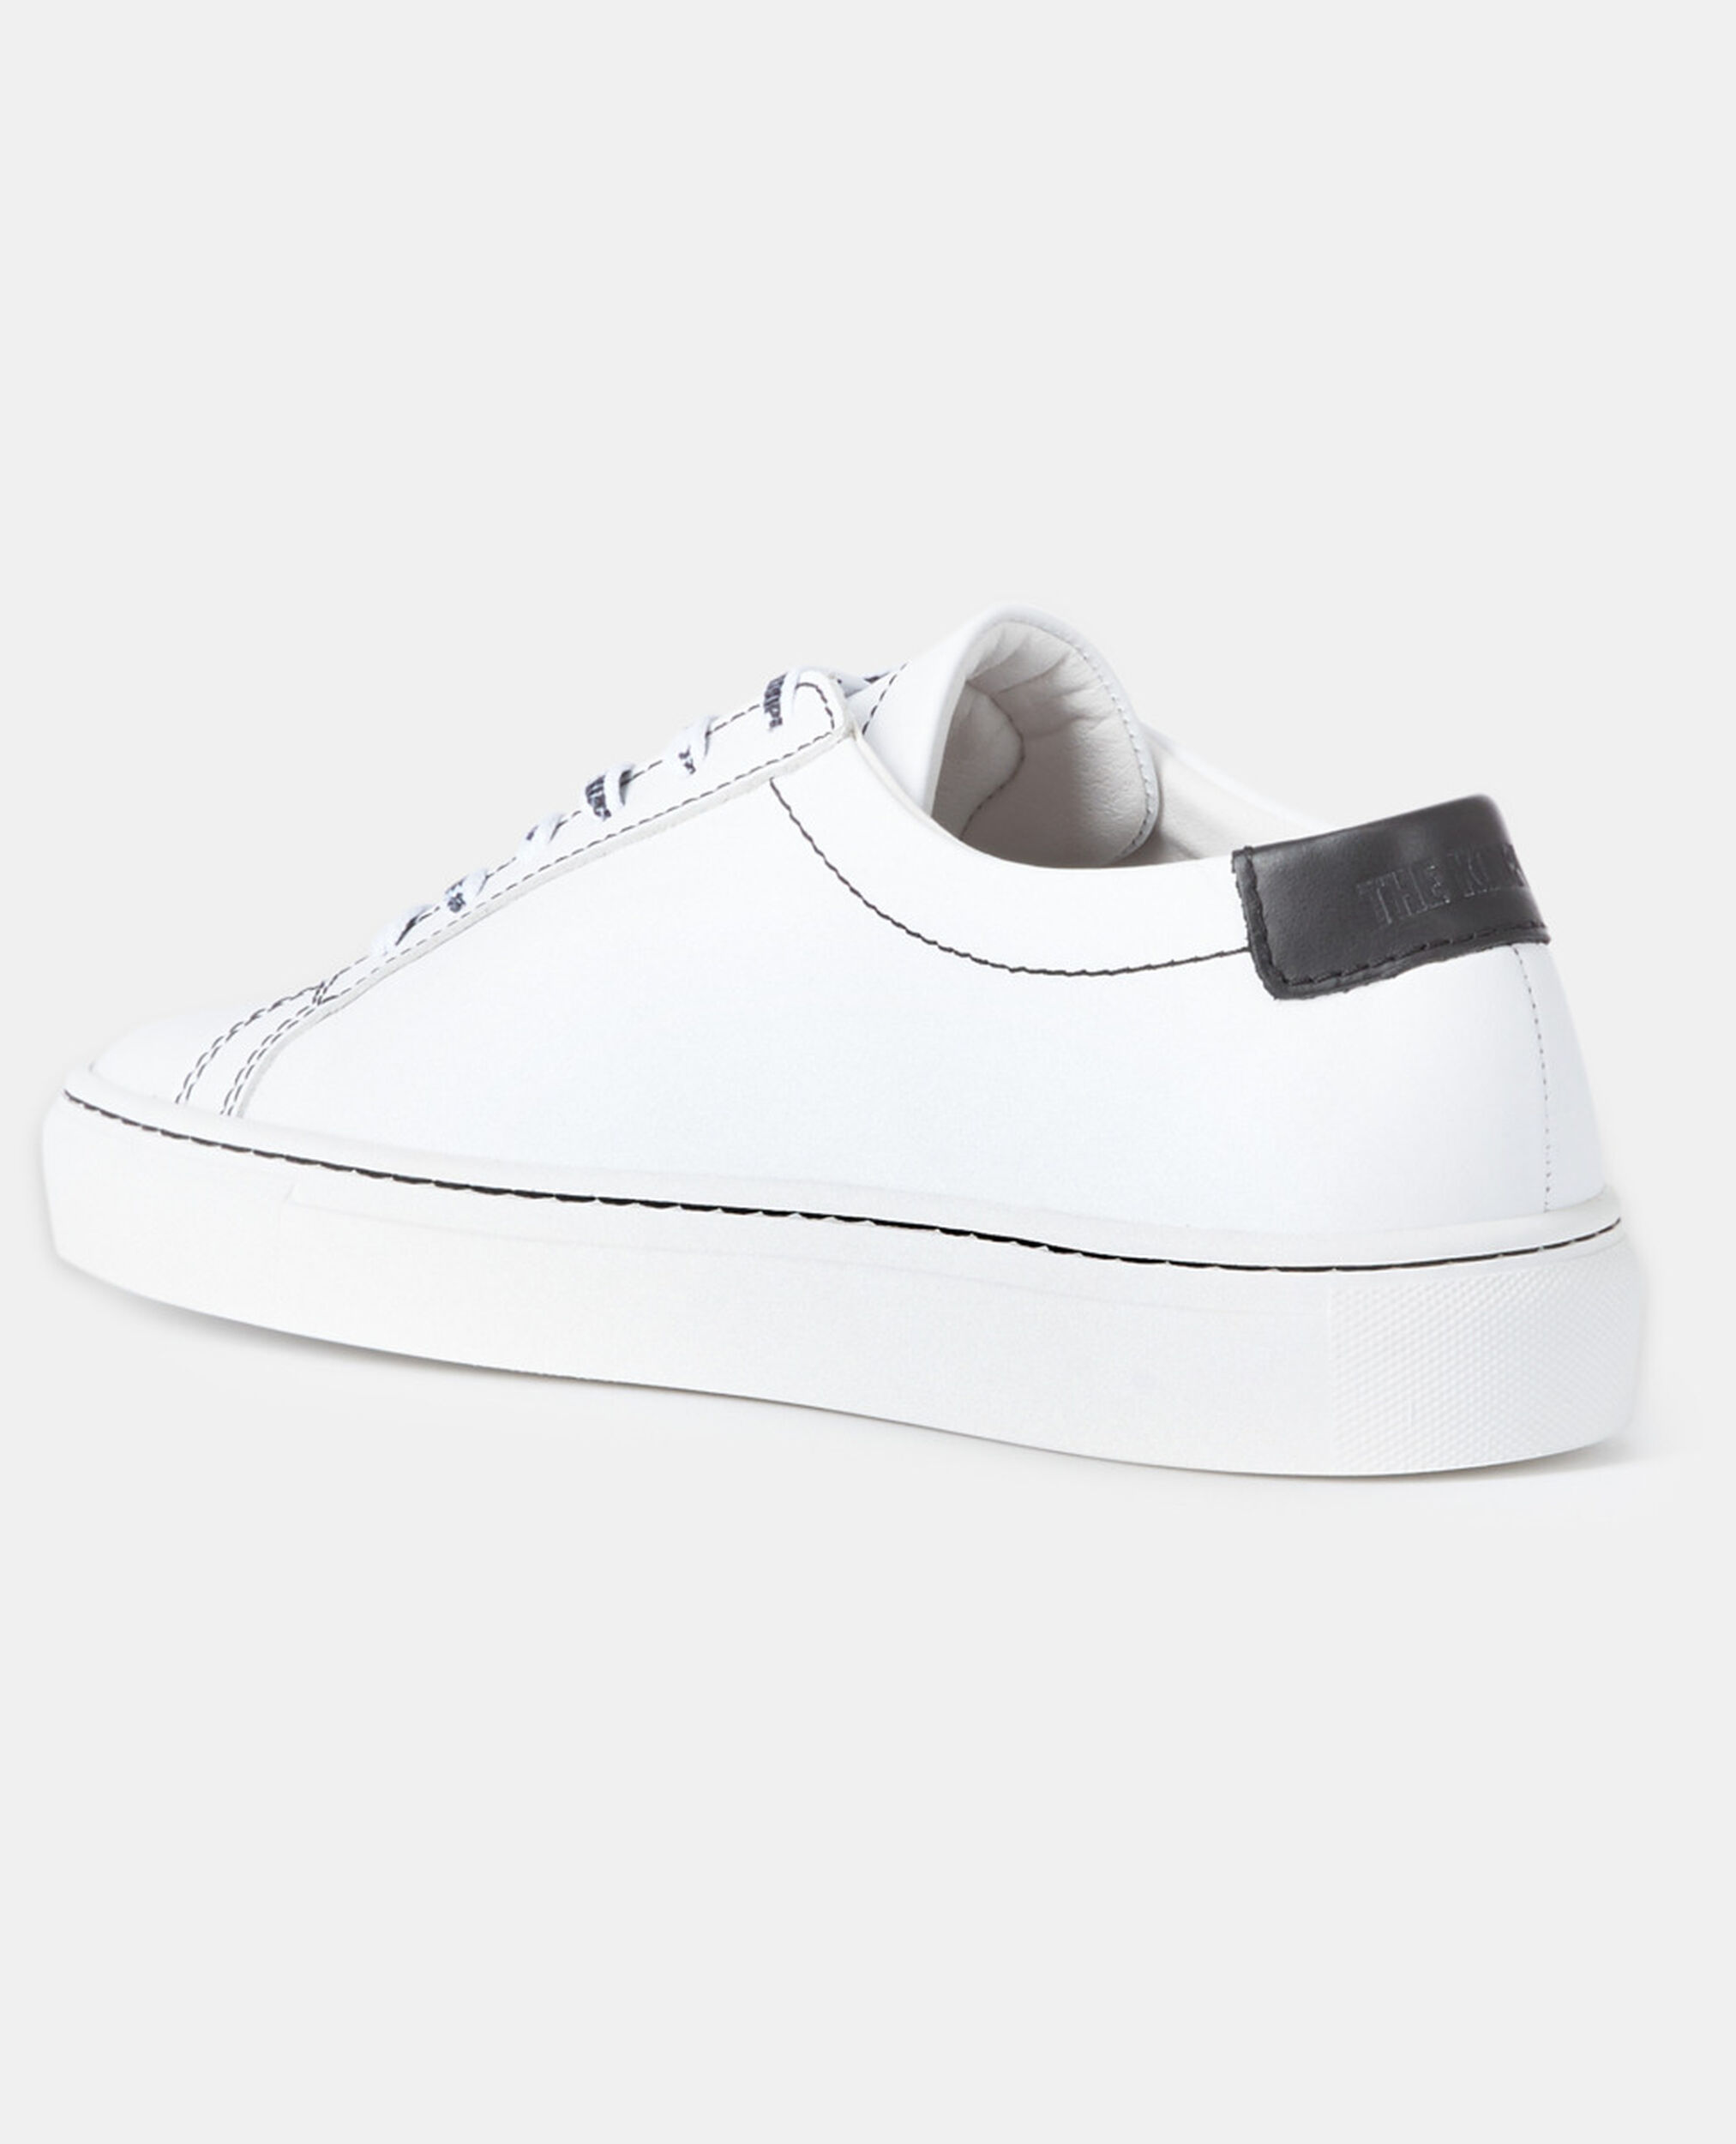 Leder-Turnschuhe in Weiß, WHITE, hi-res image number null